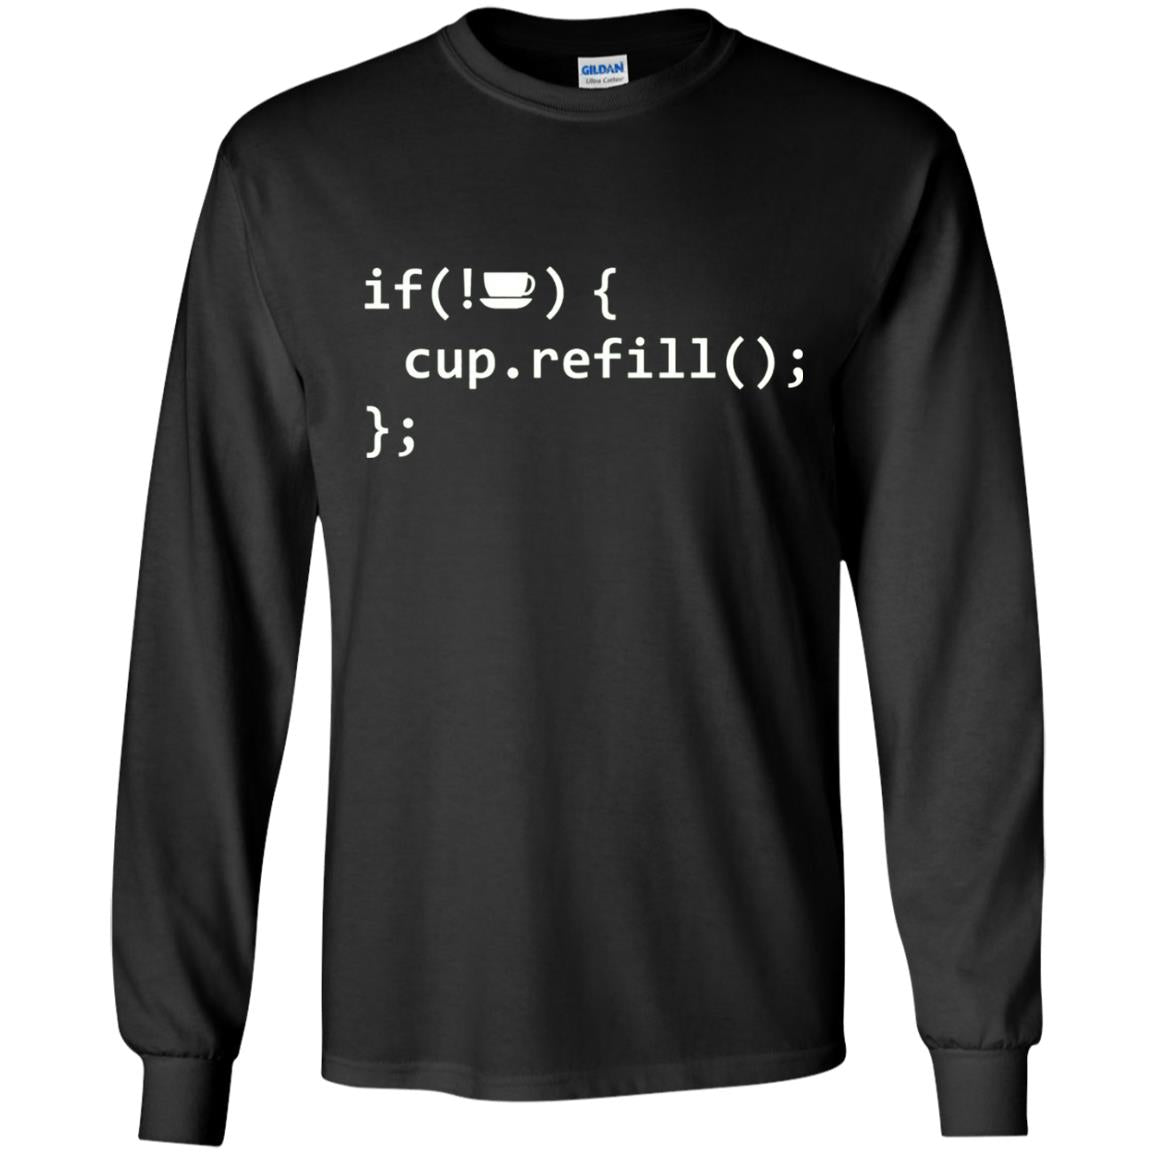 If Coffee Empty Then Refill Cup Funny It Programmer T-shirt